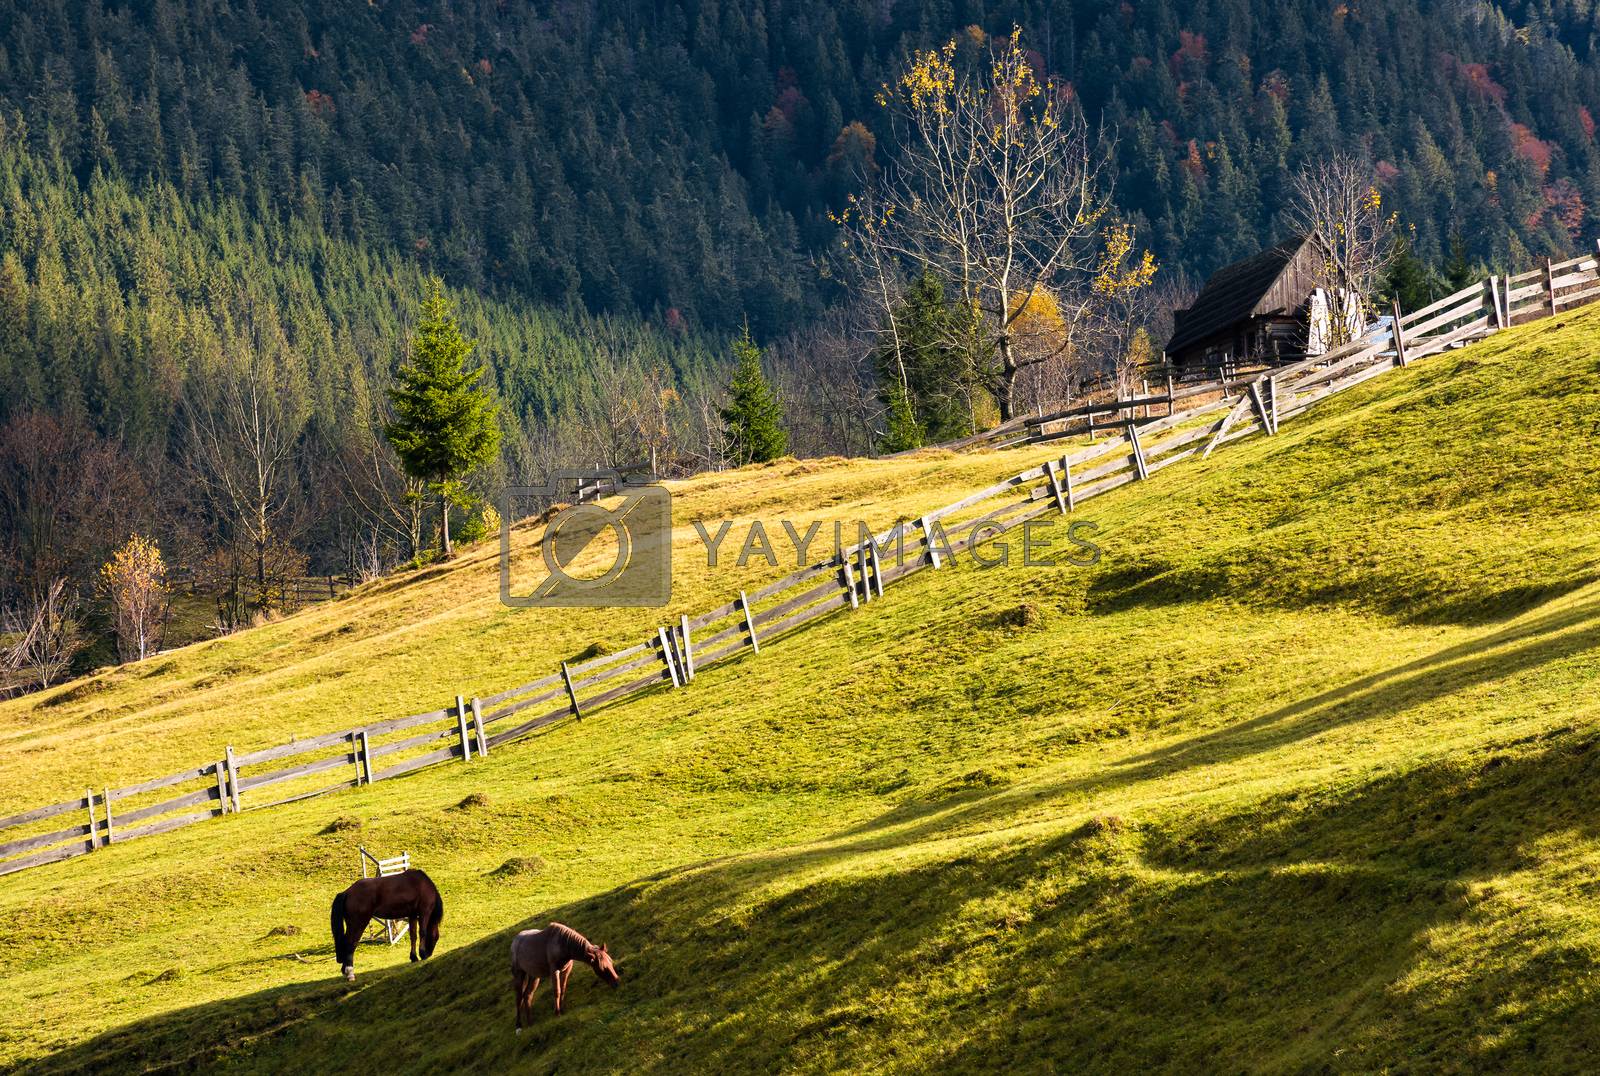 Royalty free image of horses on a grassy hillside near the village by Pellinni